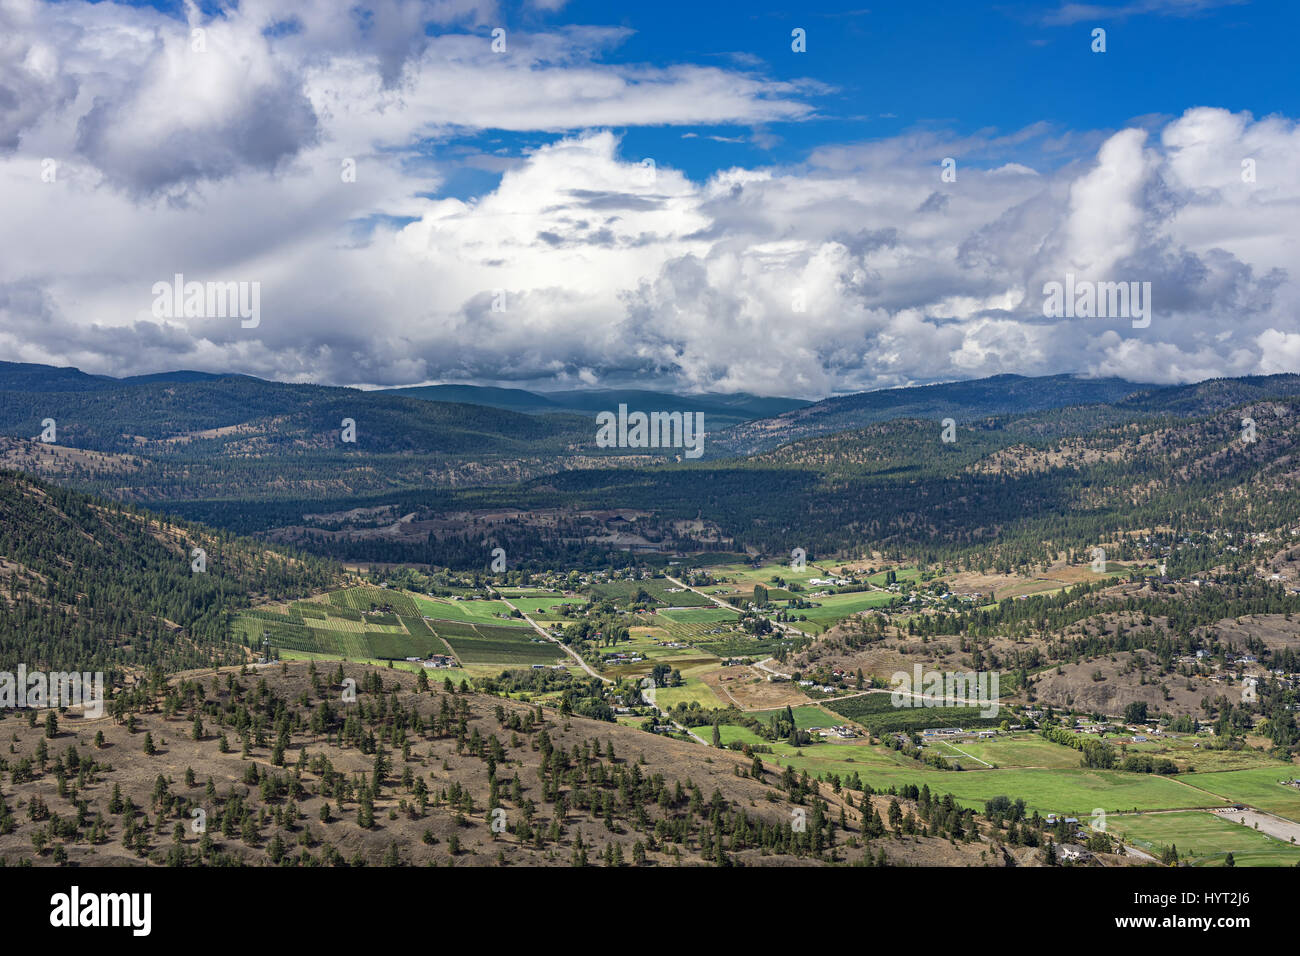 Orchards Vineyards and famland from Giants Head Mountain near Summerland British Columbia Canada on a summer day Stock Photo